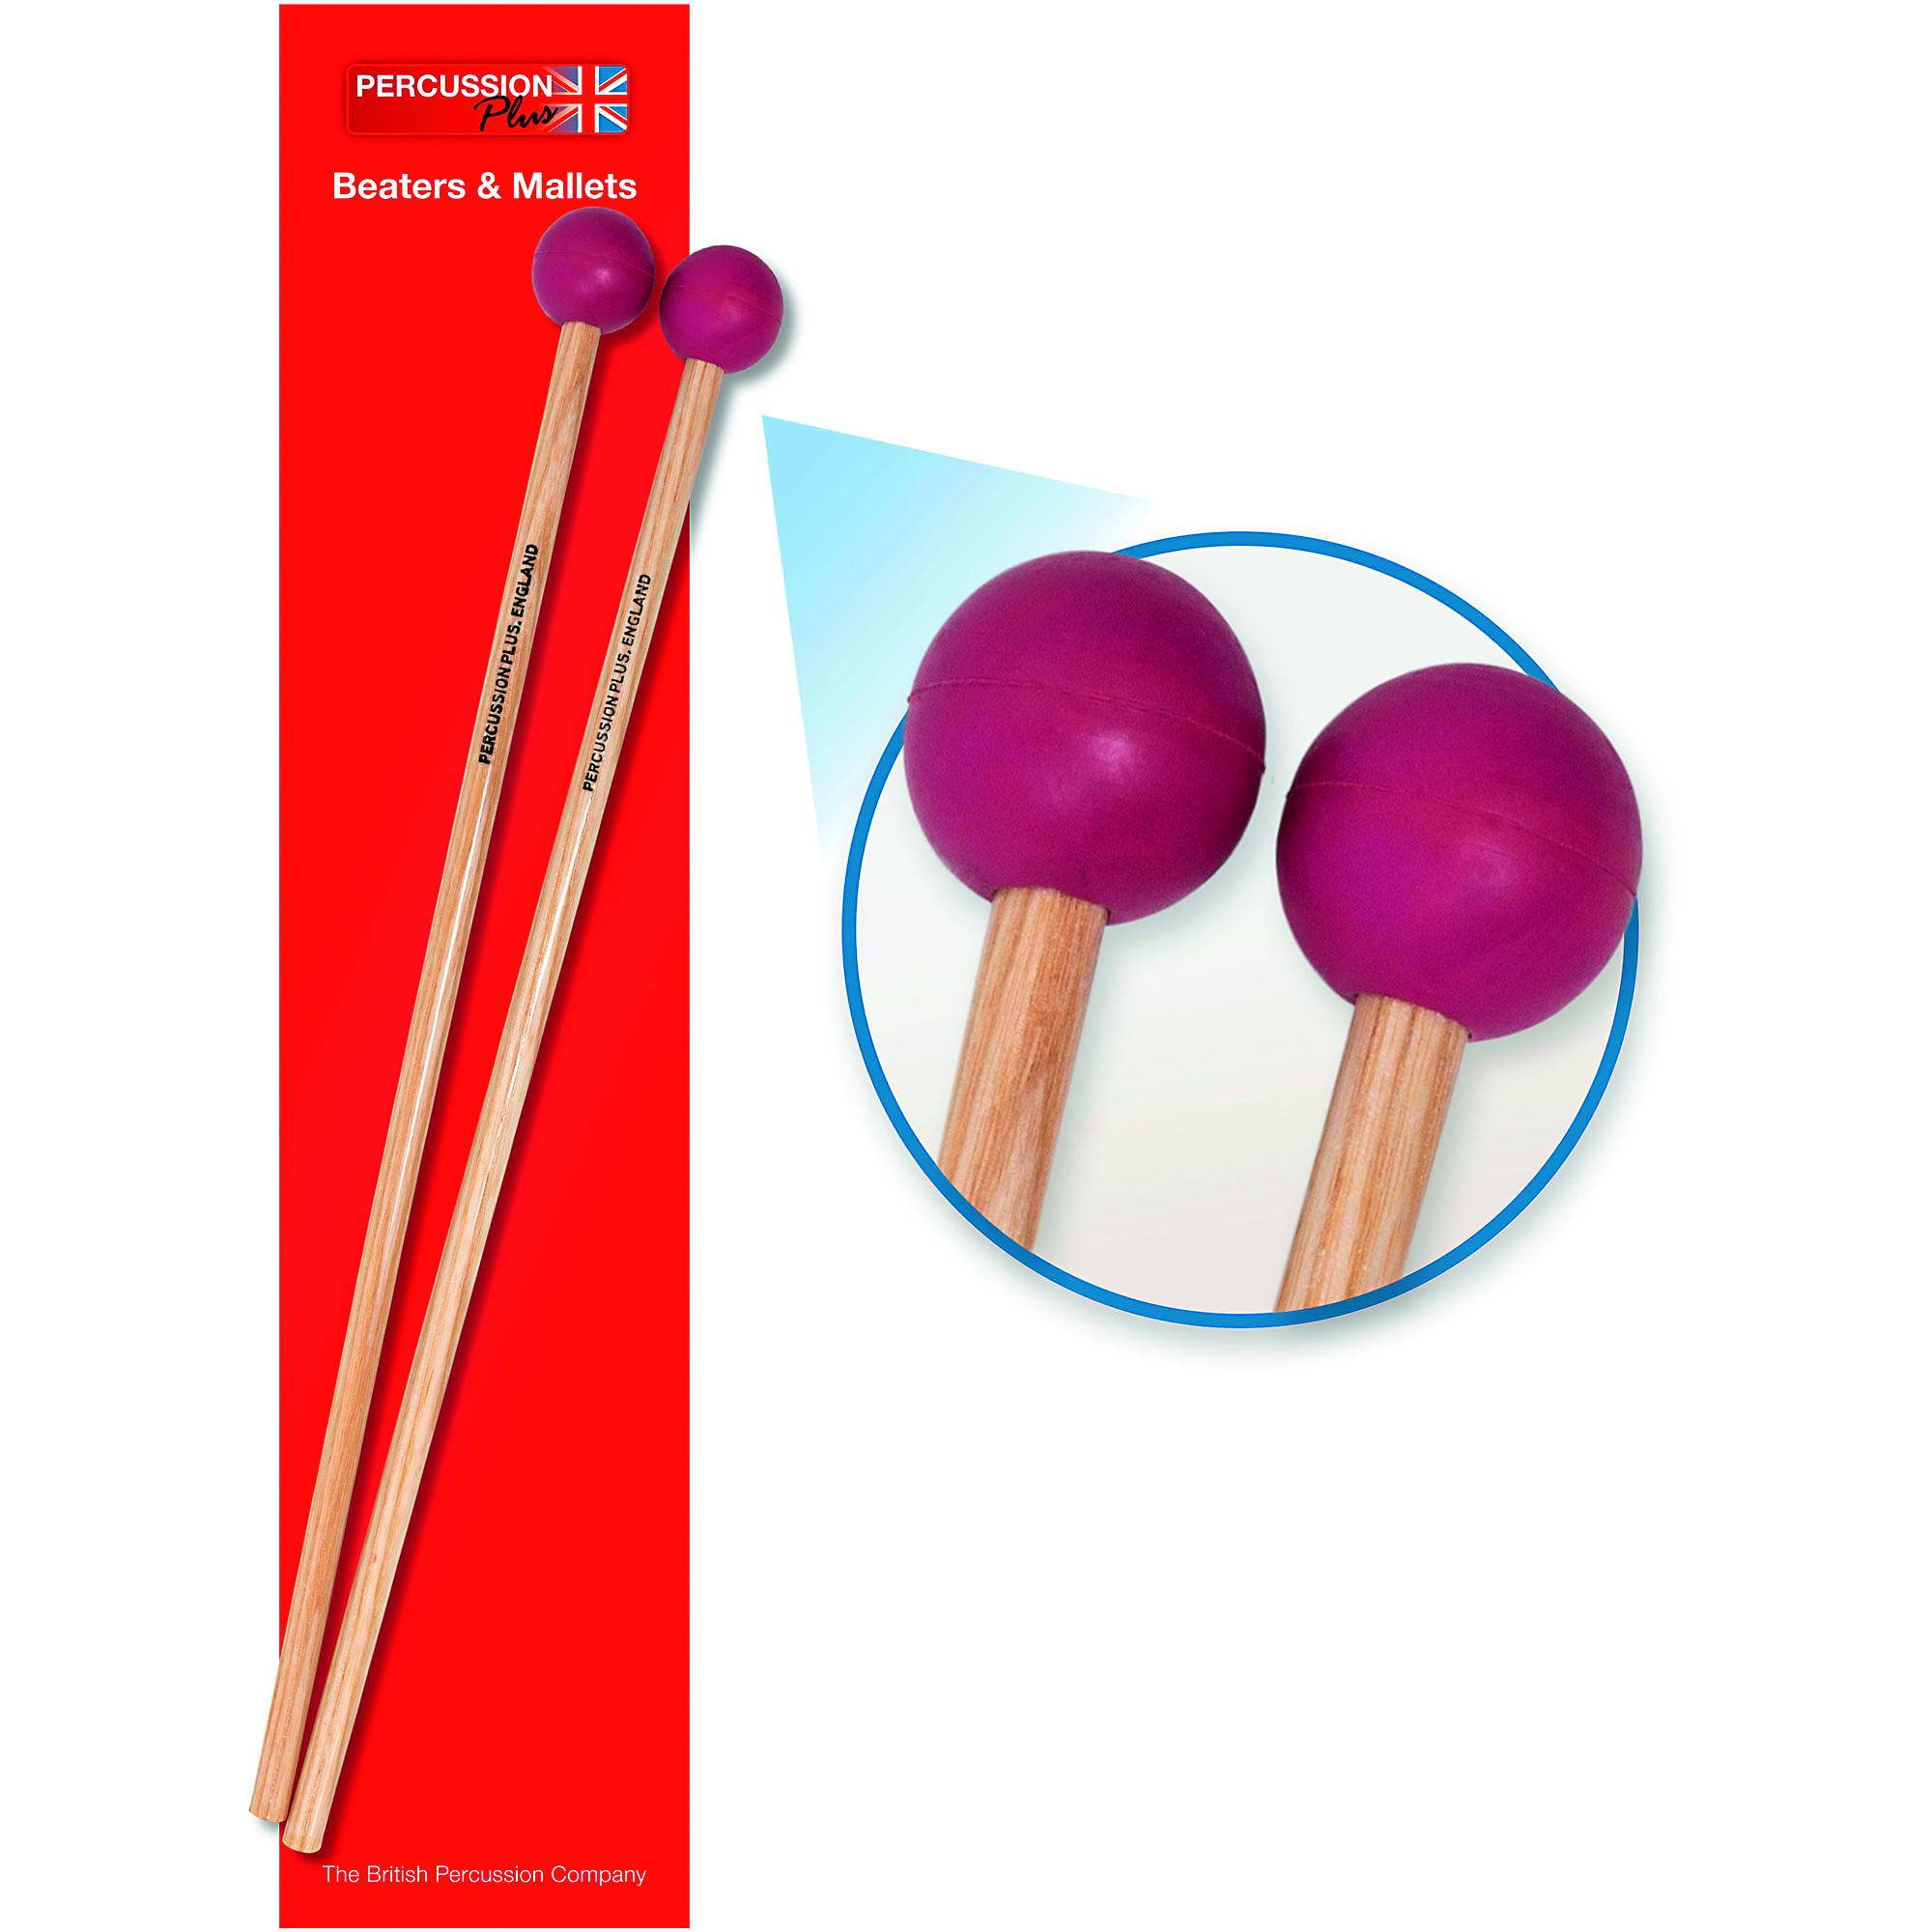 Professional Xylophone Mallets Hard